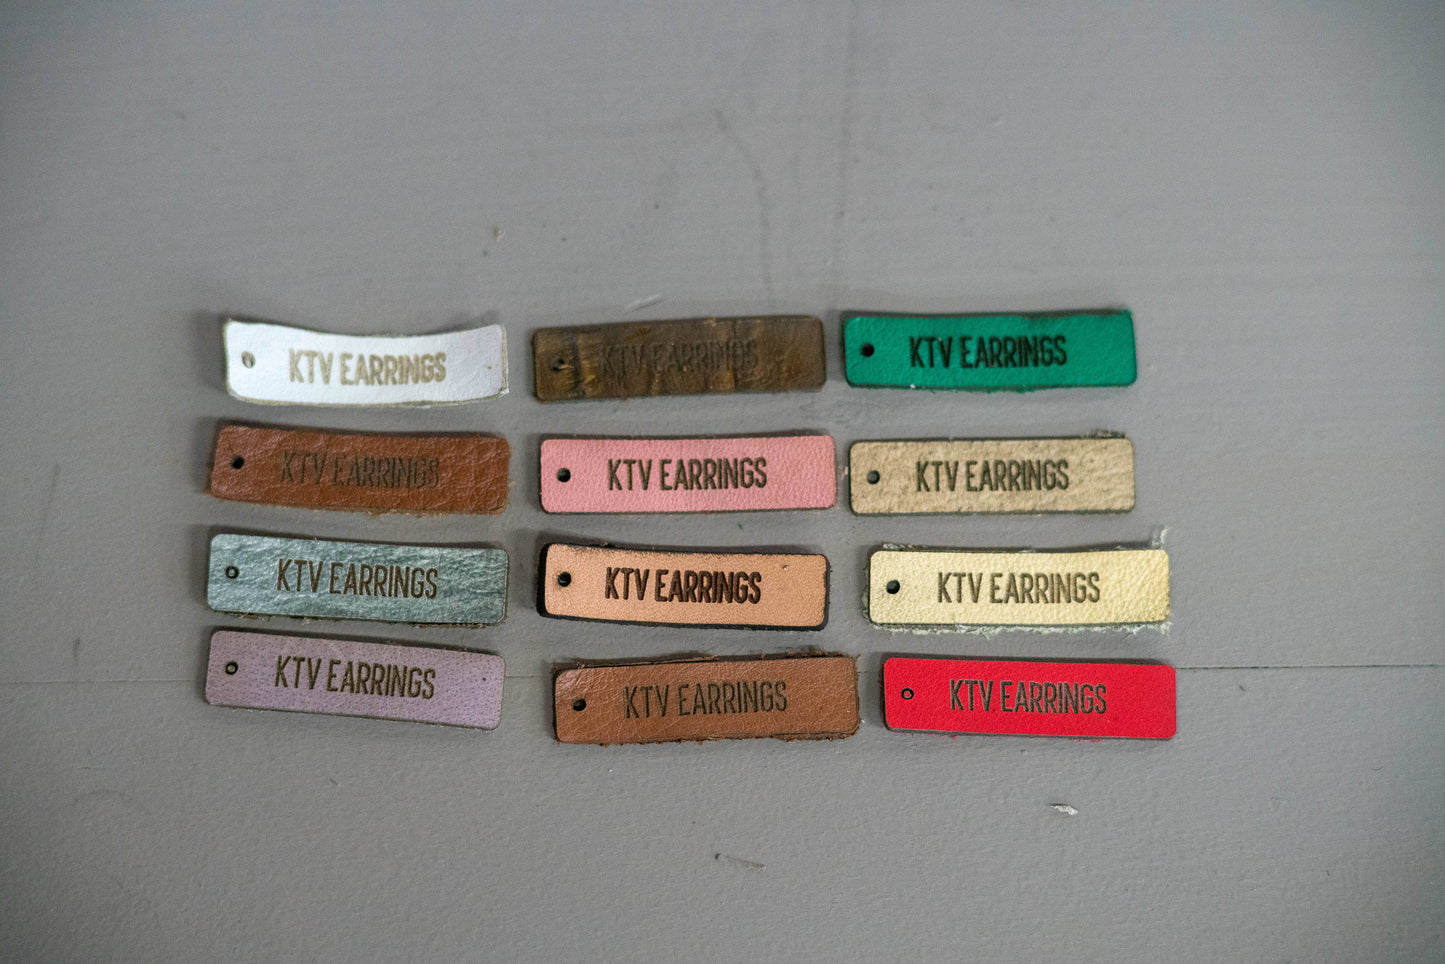 Jewelry Tags - Jewellery Tags - Necklace Tags - Hanging Tags - Leather tags - Garment Tags - Product Tags - Set of 12 - MEDIUM RECTANGLES